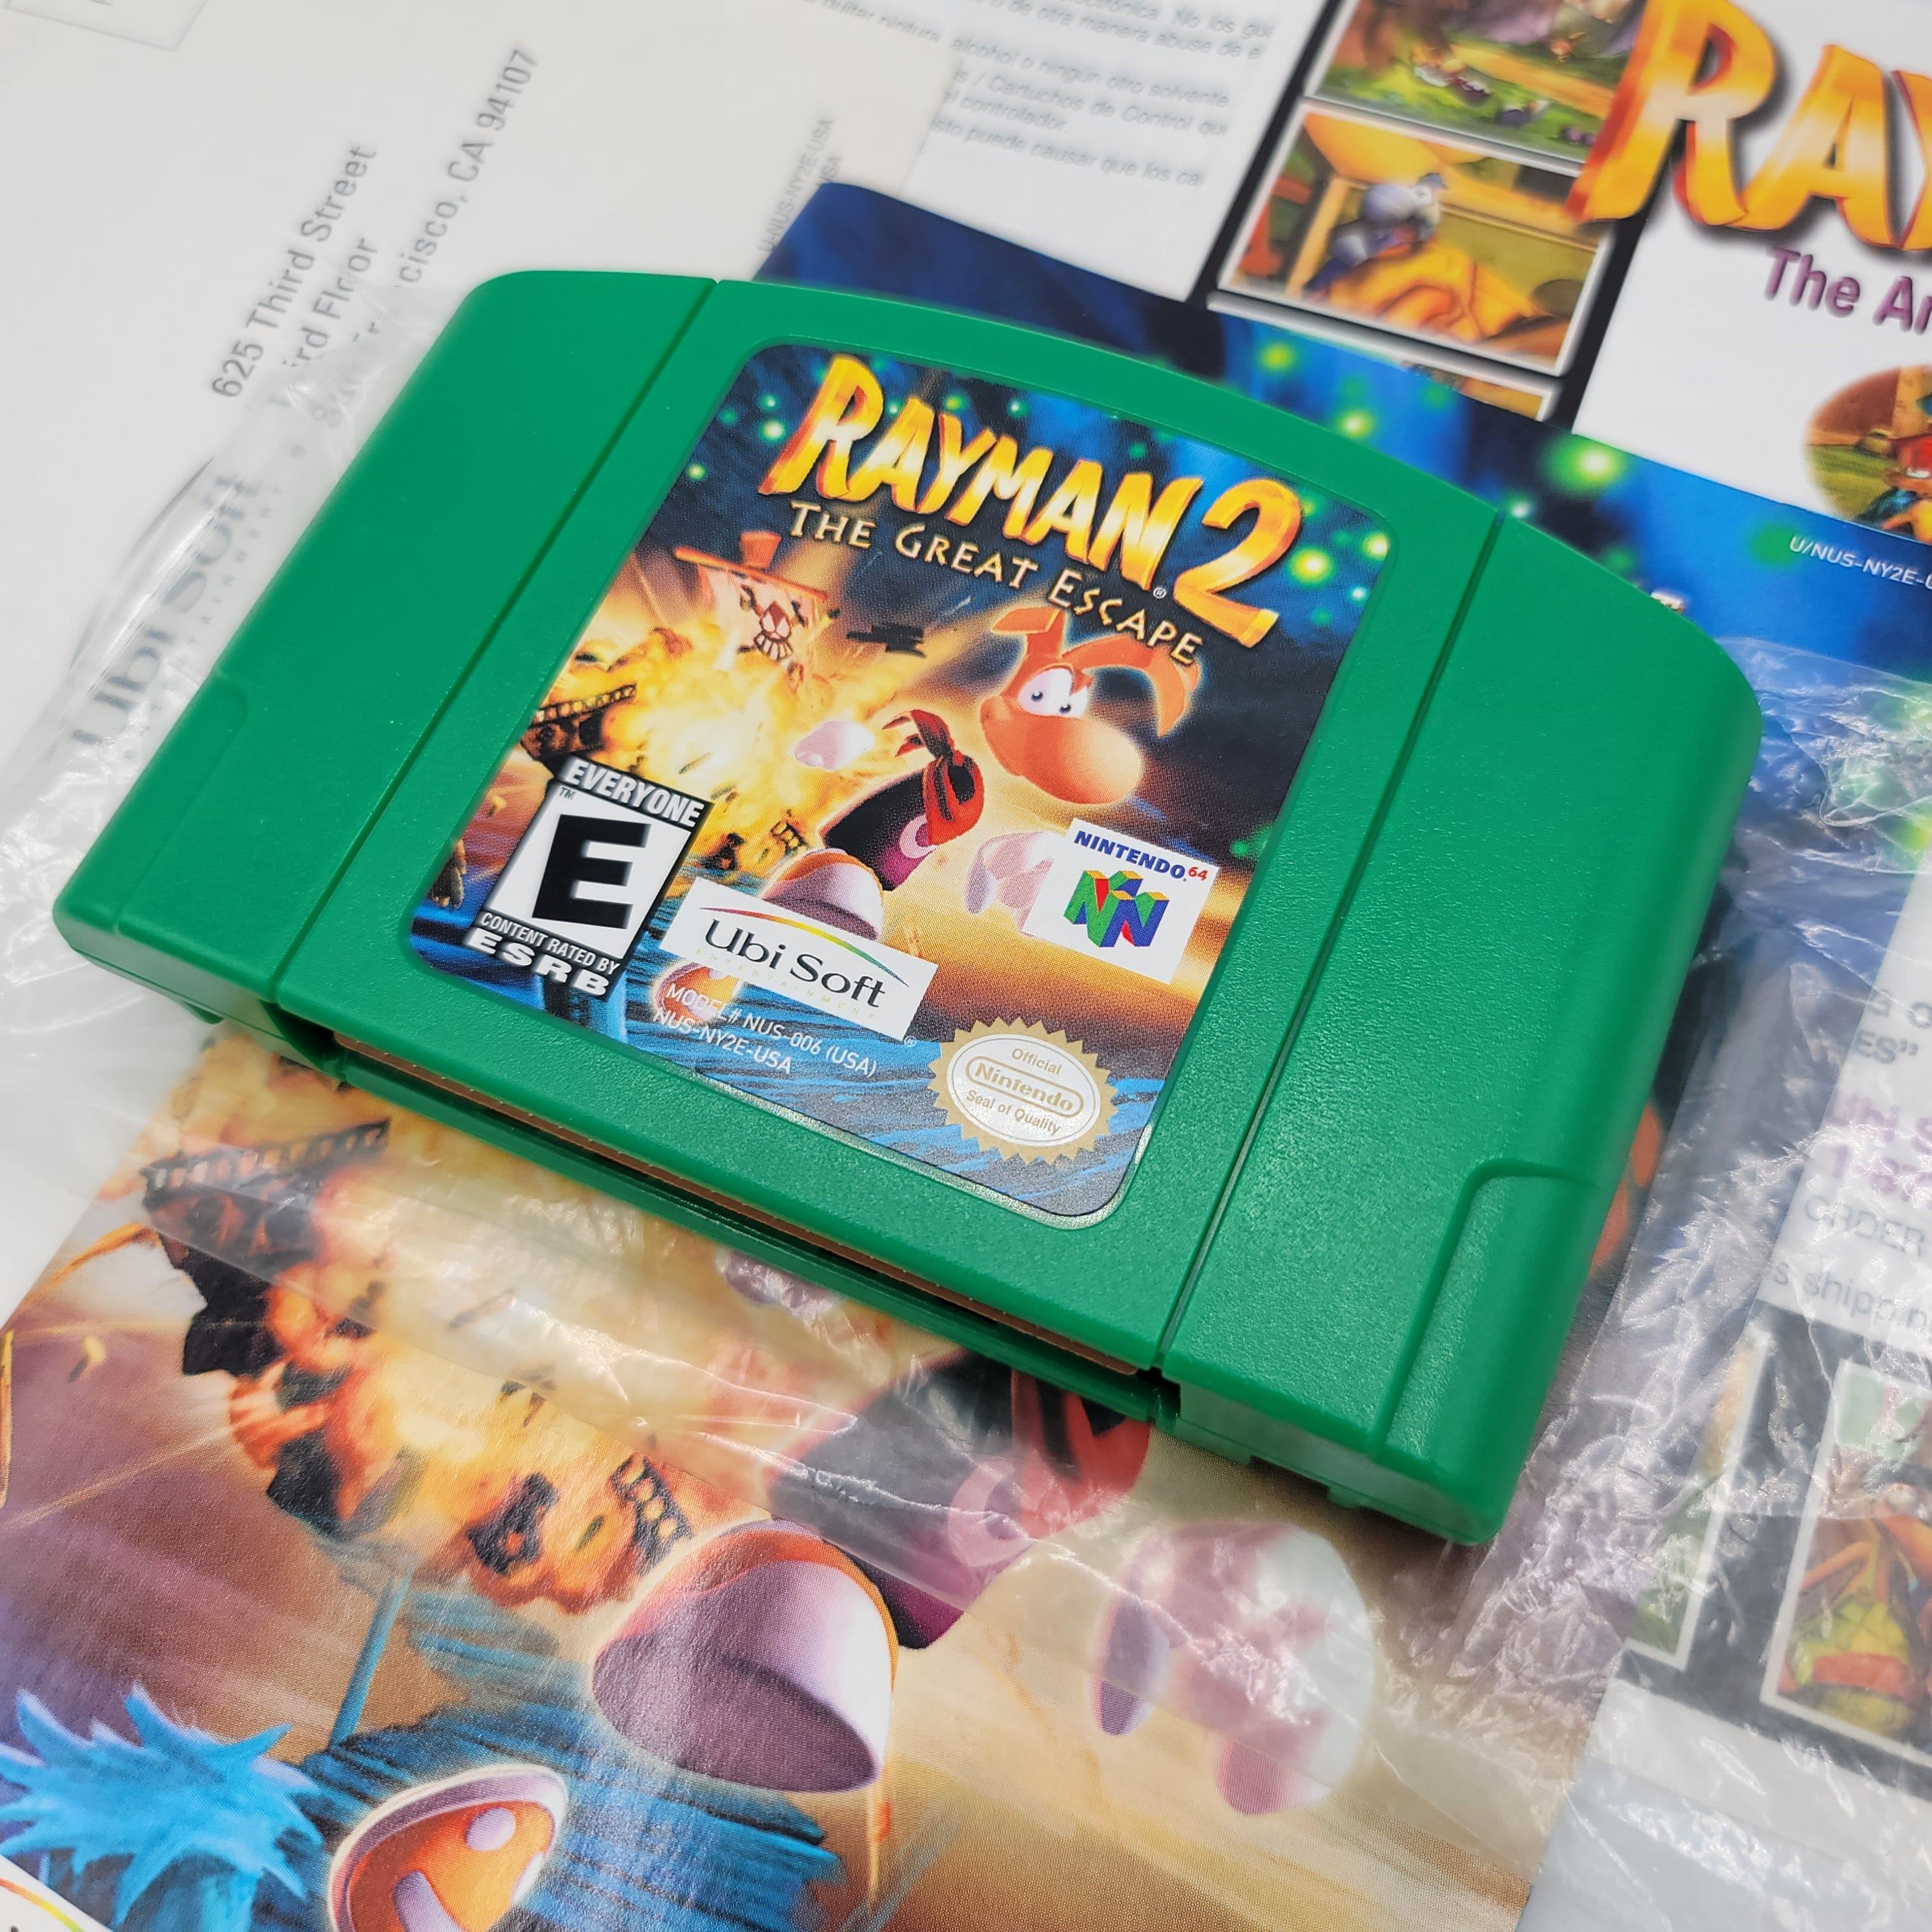 N64 - Rayman 2 The Great Escape (Complete in Box / A / With Manual)